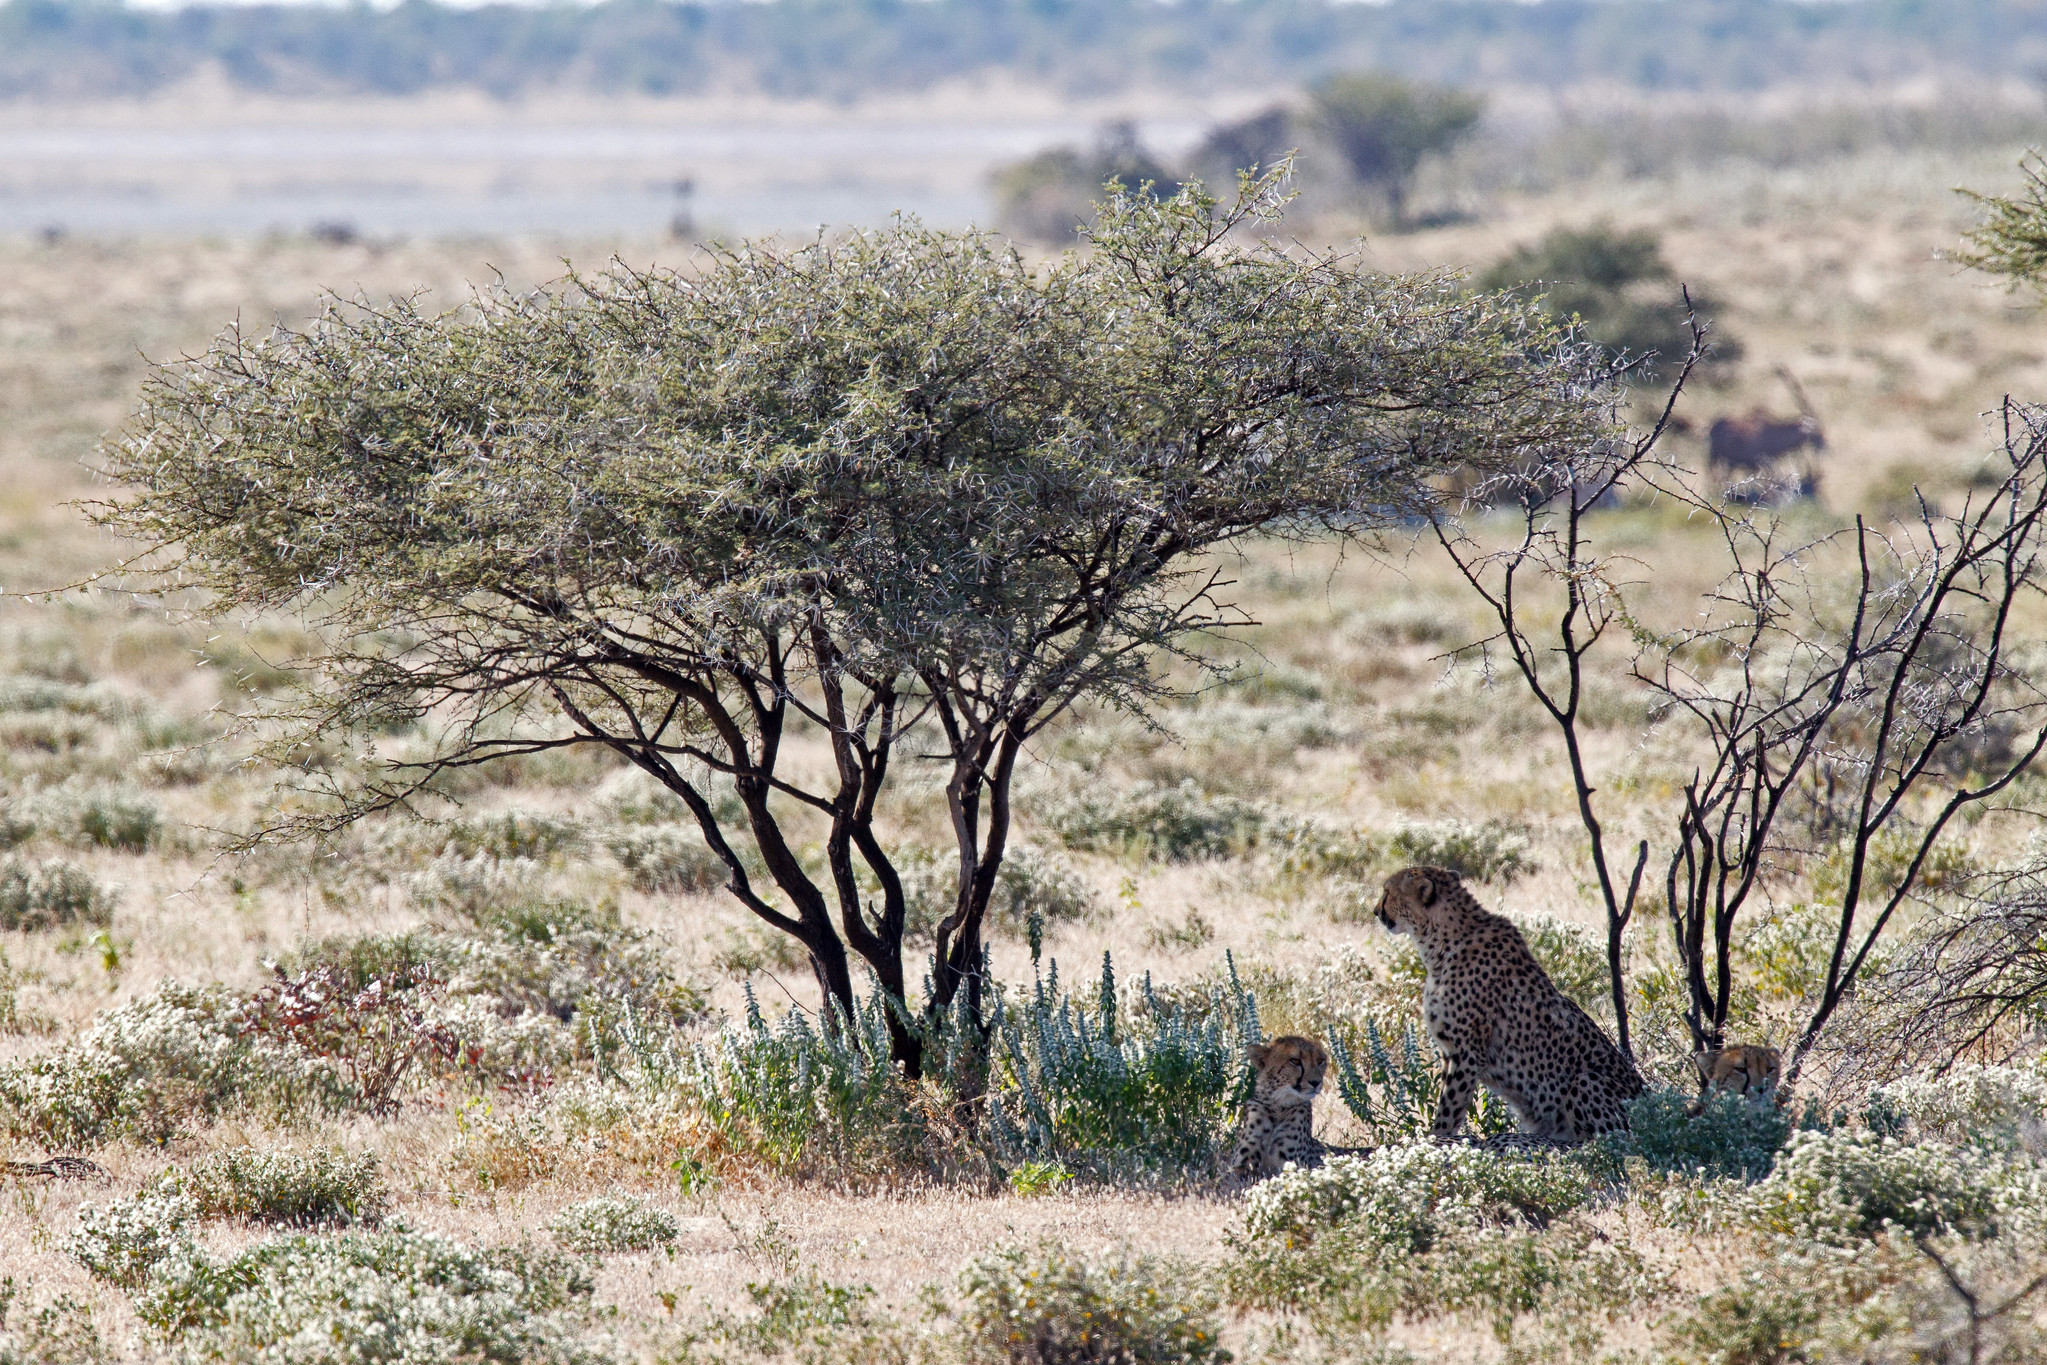 Cheetah with two cubs - Namibia